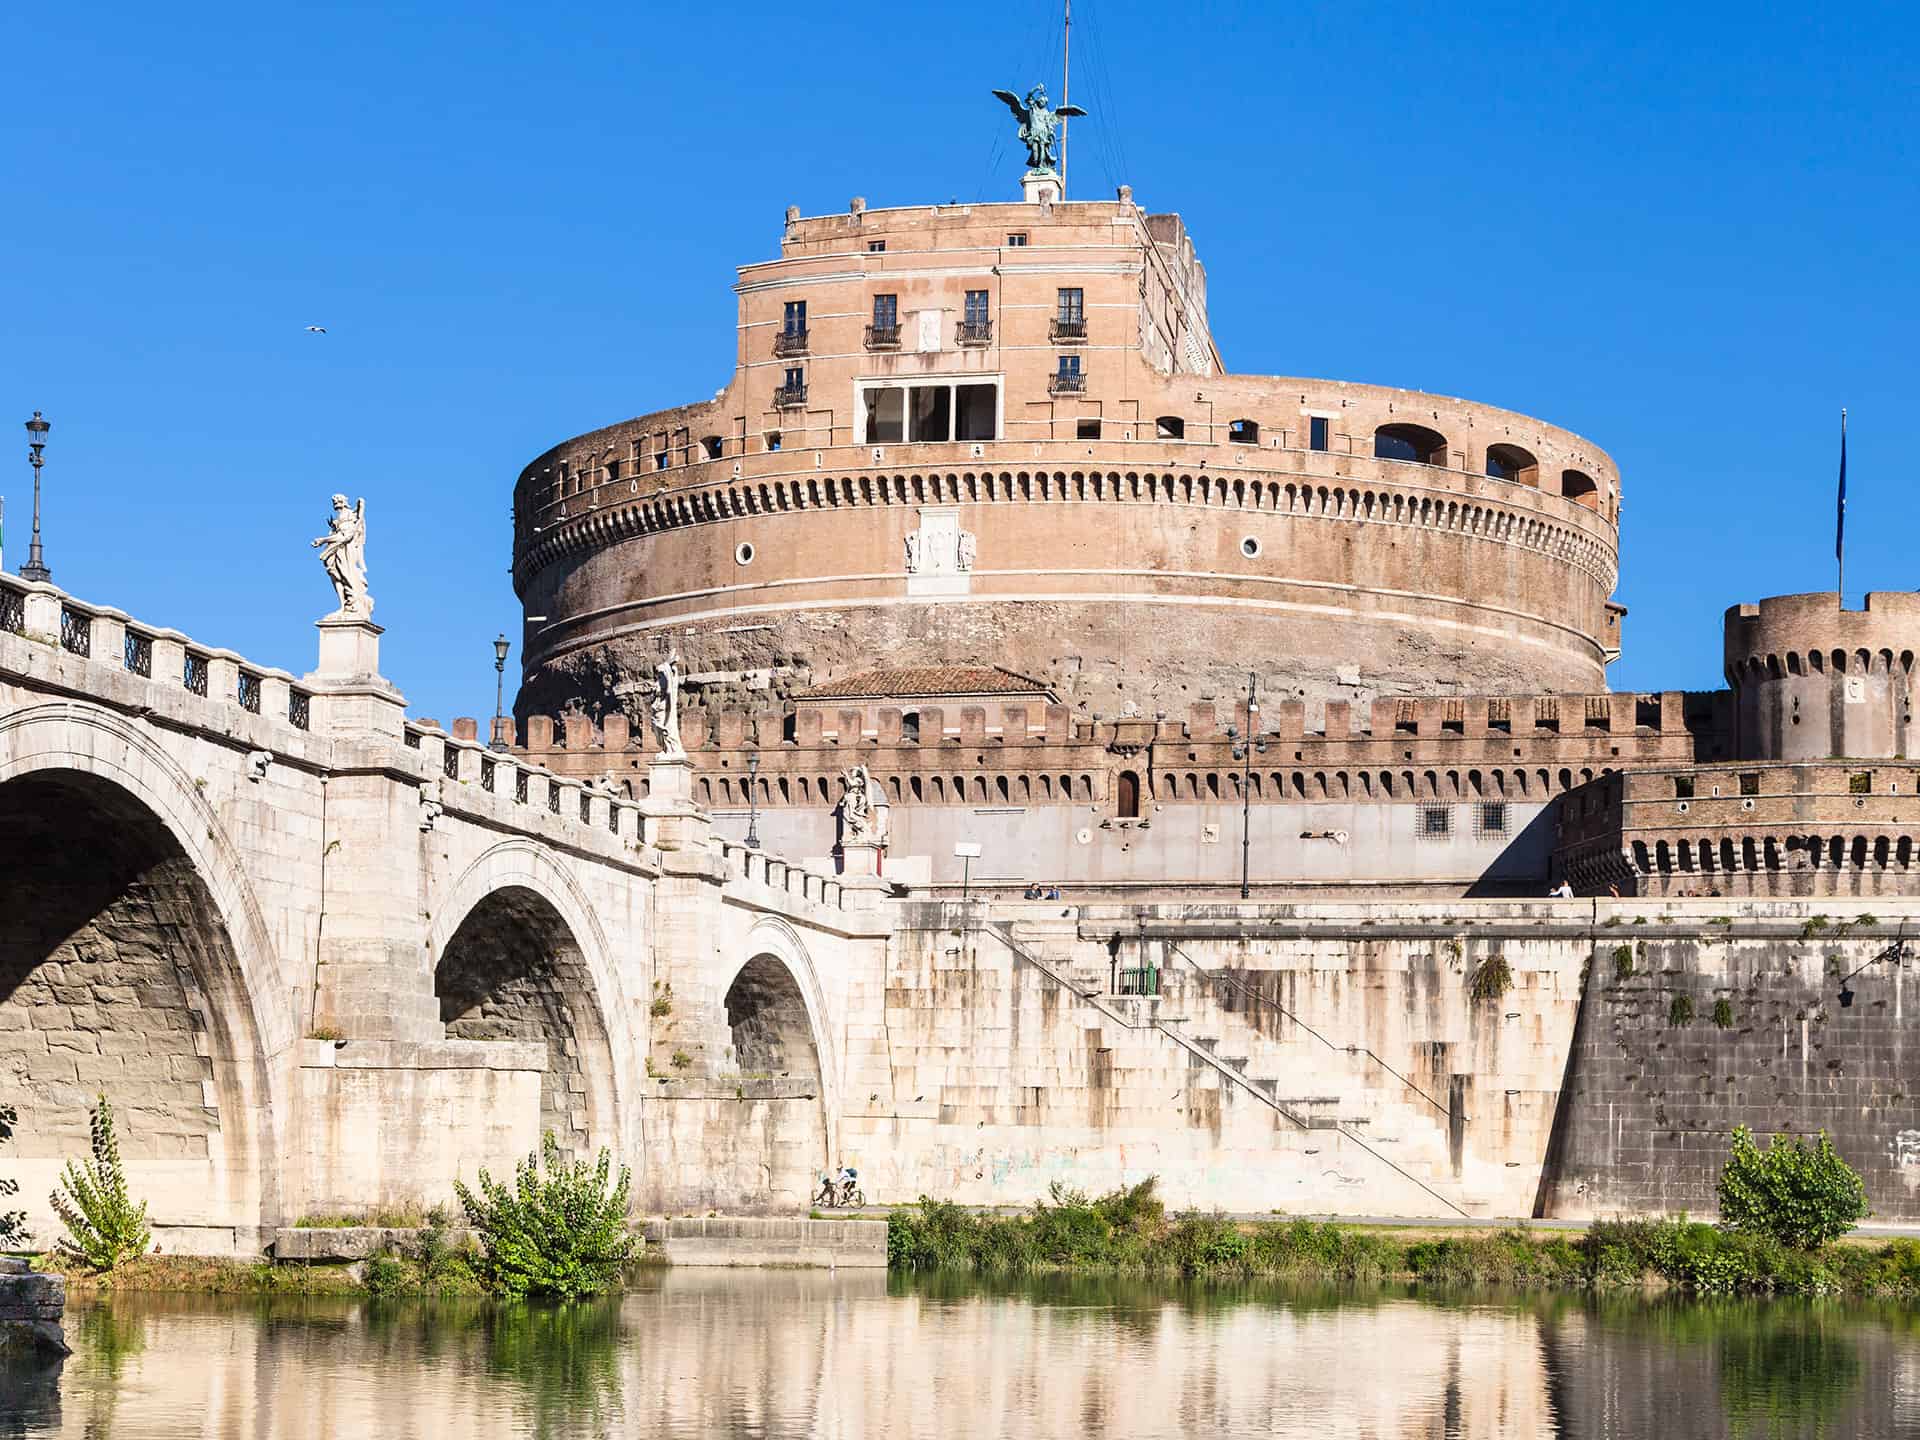 castell saint angelo in rome